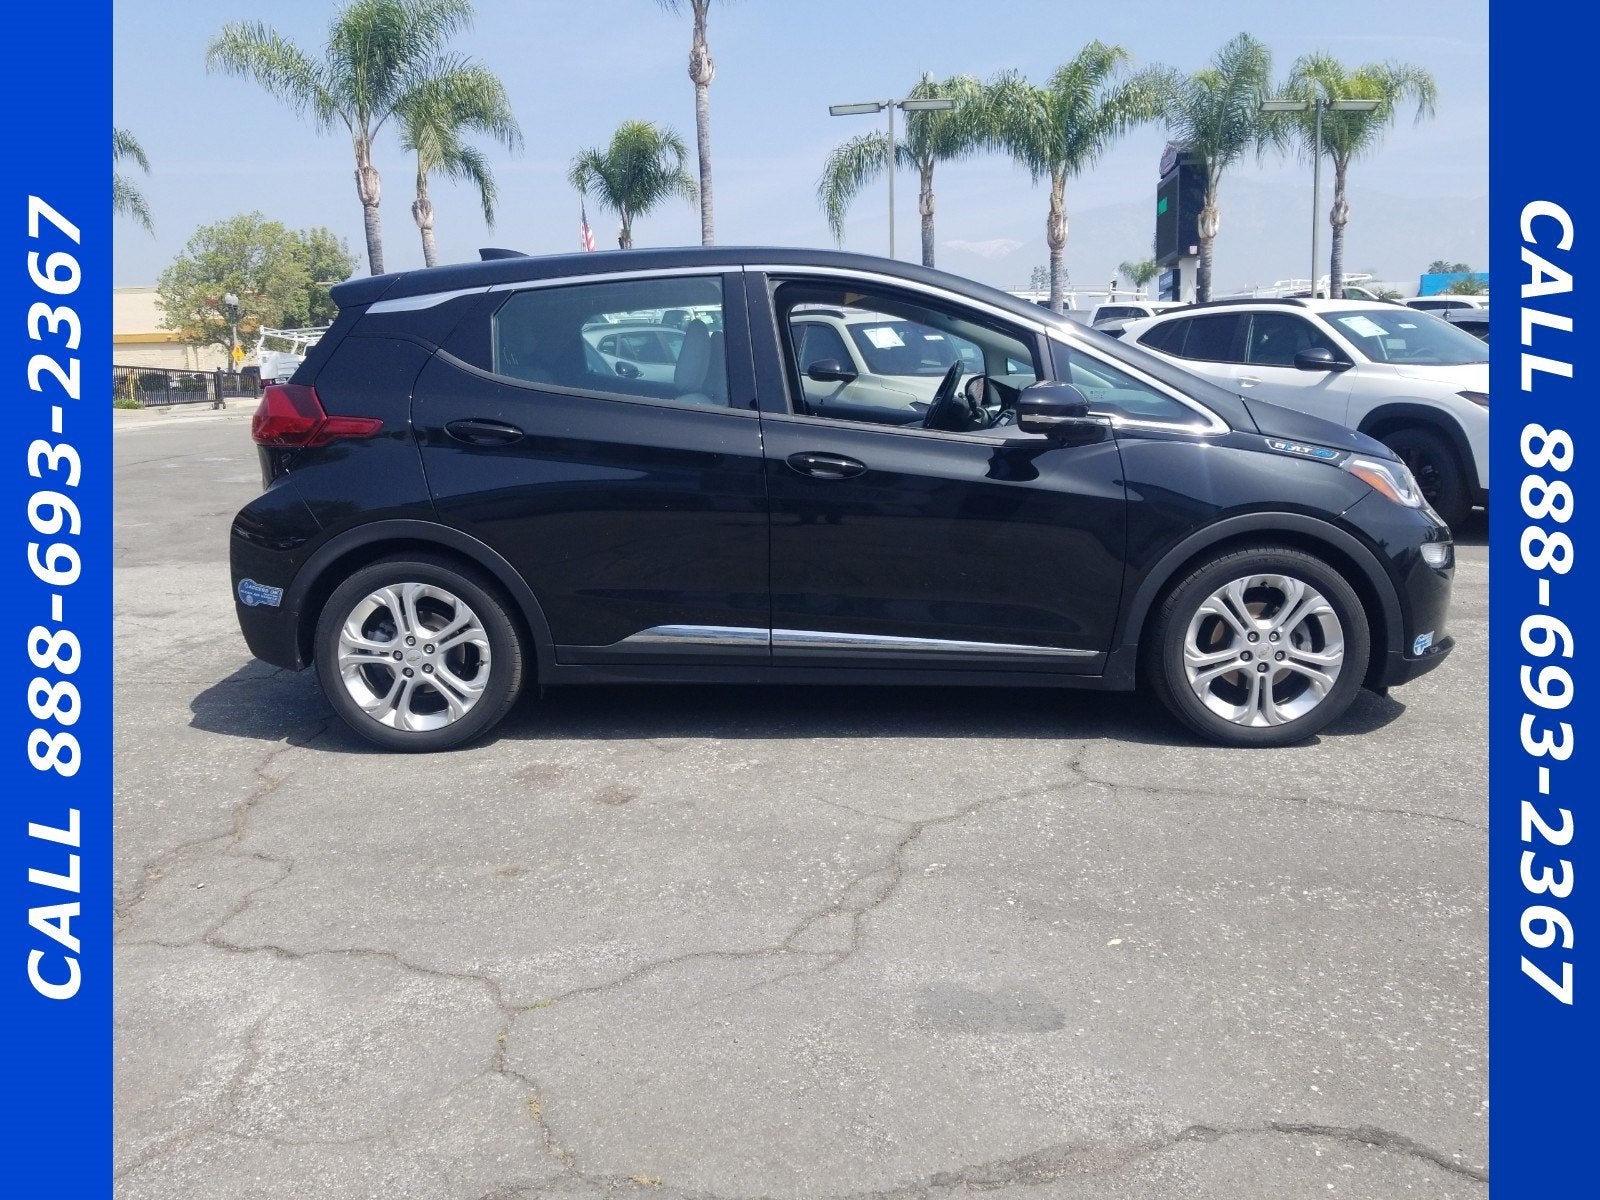 Used 2021 Chevrolet Bolt EV LT with VIN 1G1FY6S00M4106958 for sale in Upland, CA